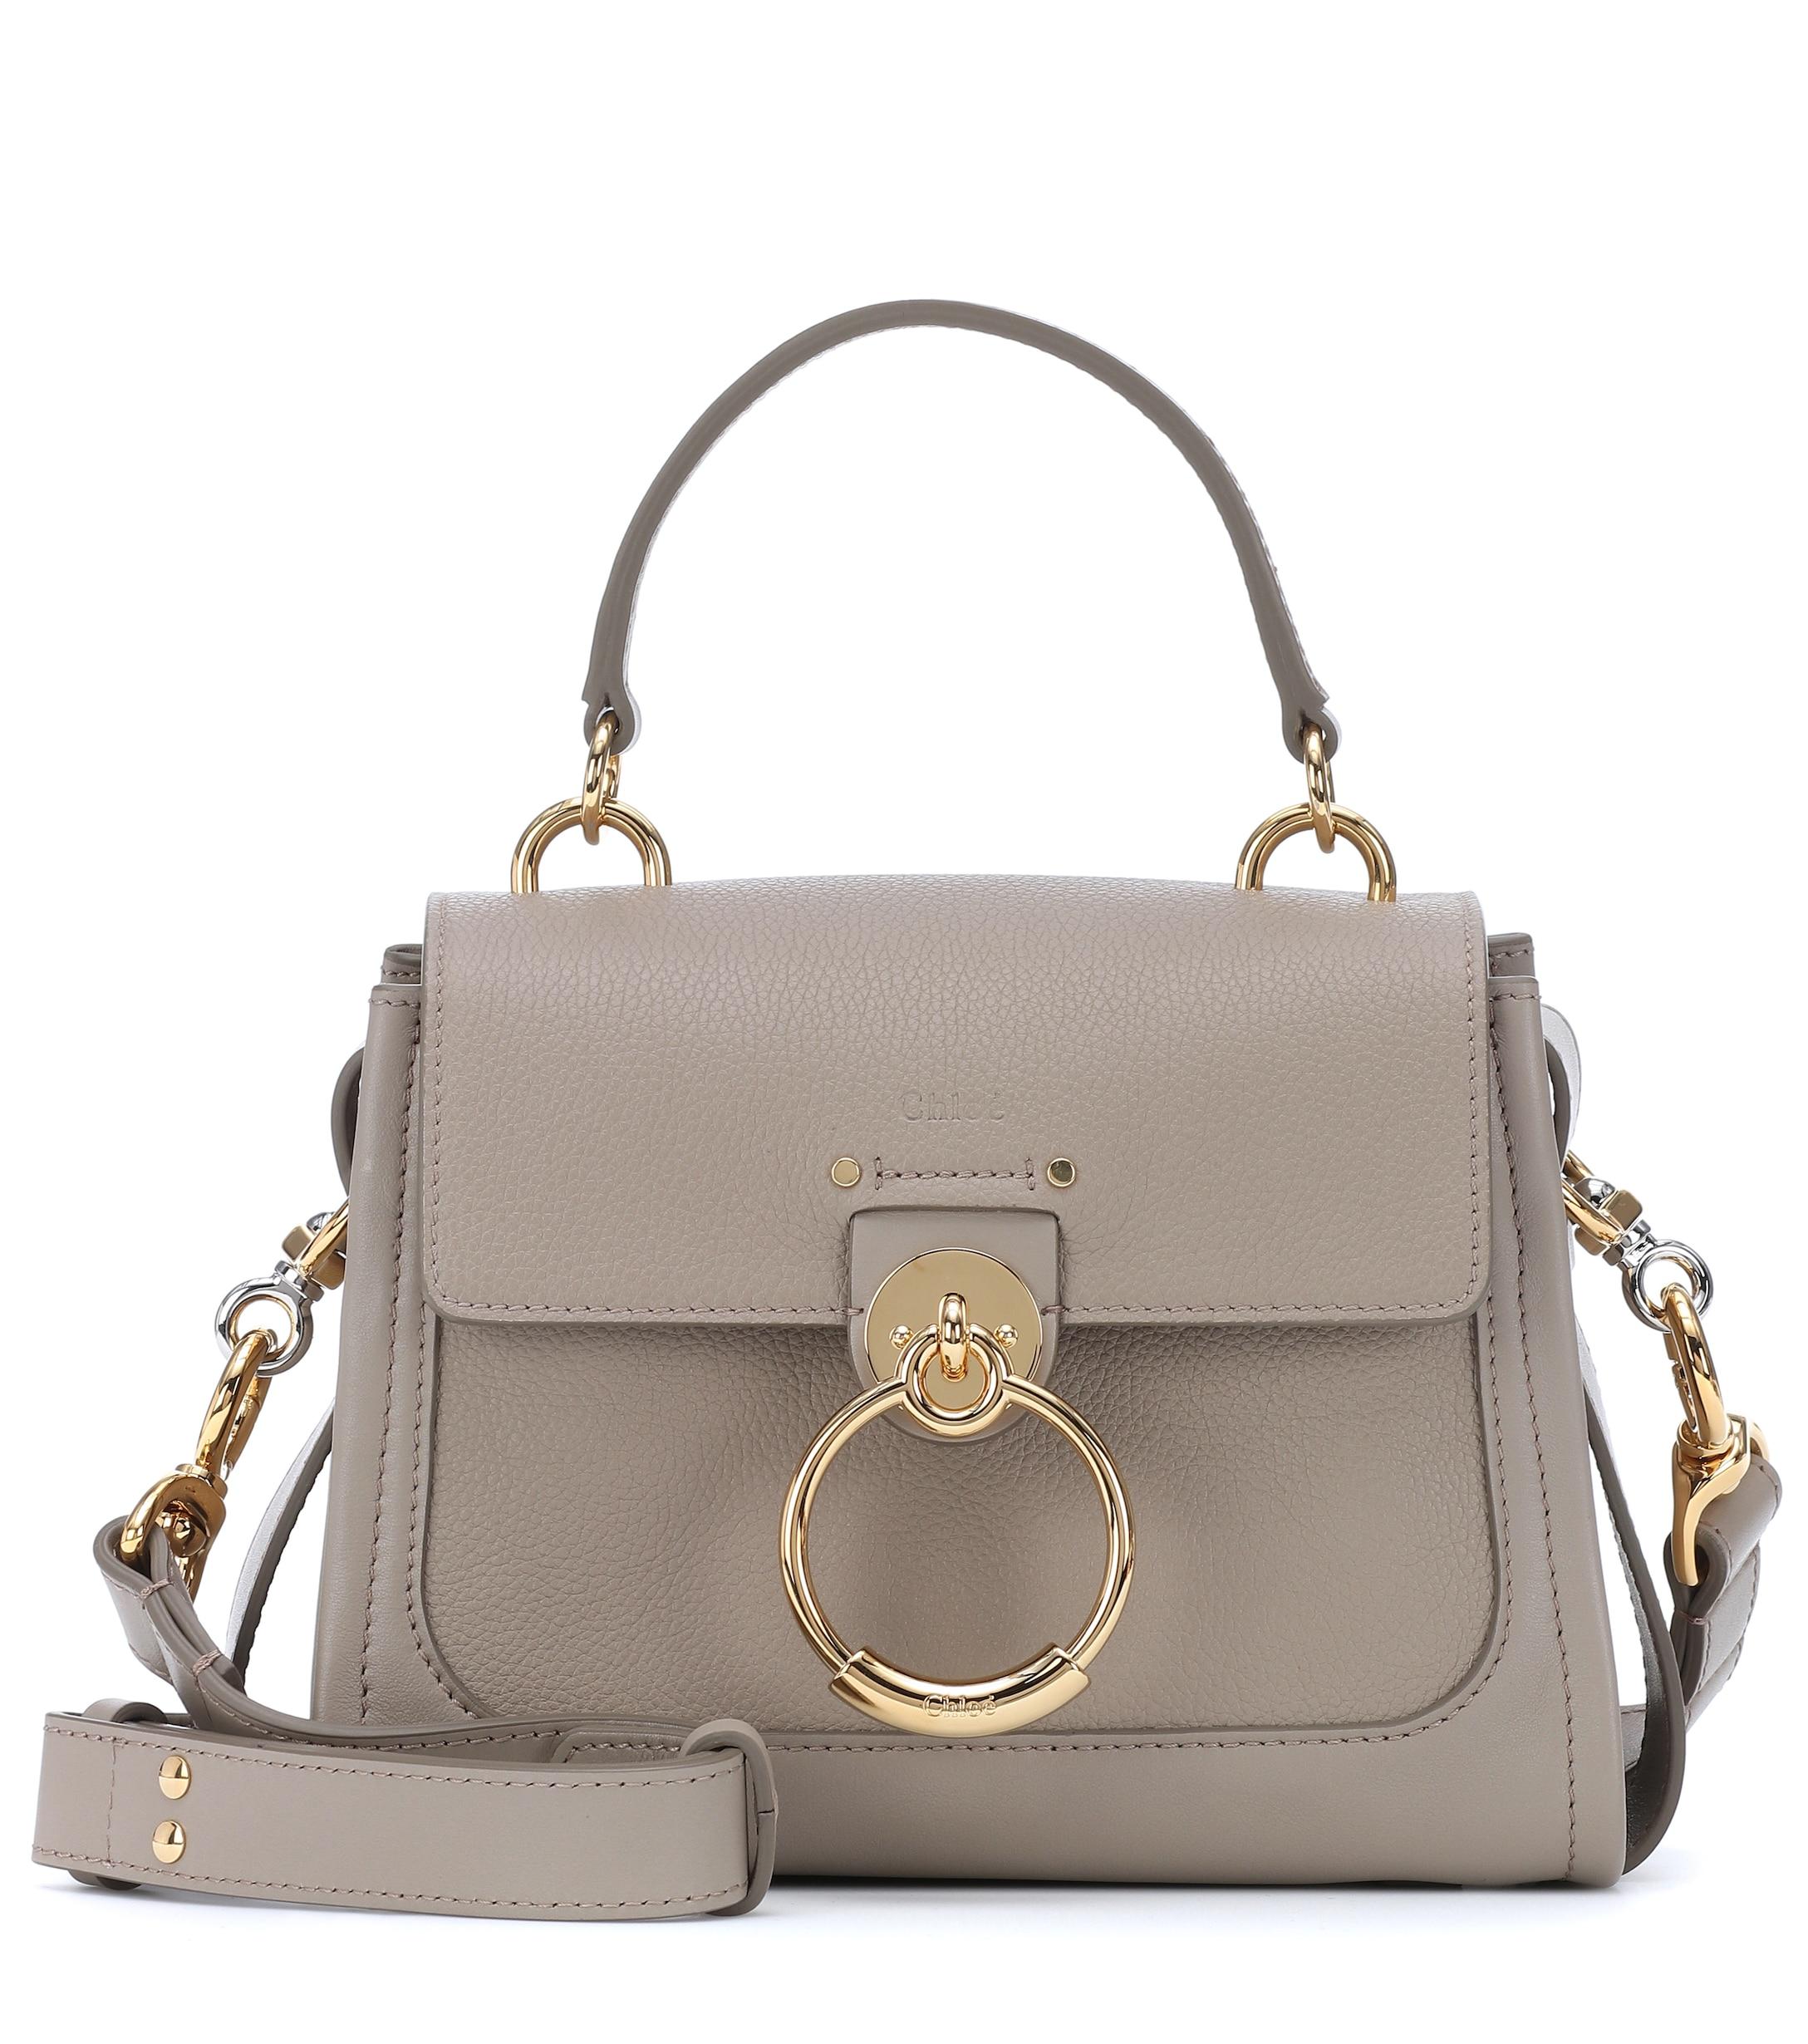 Chloé Tess Small Leather Shoulder Bag in Grey (Gray) - Lyst